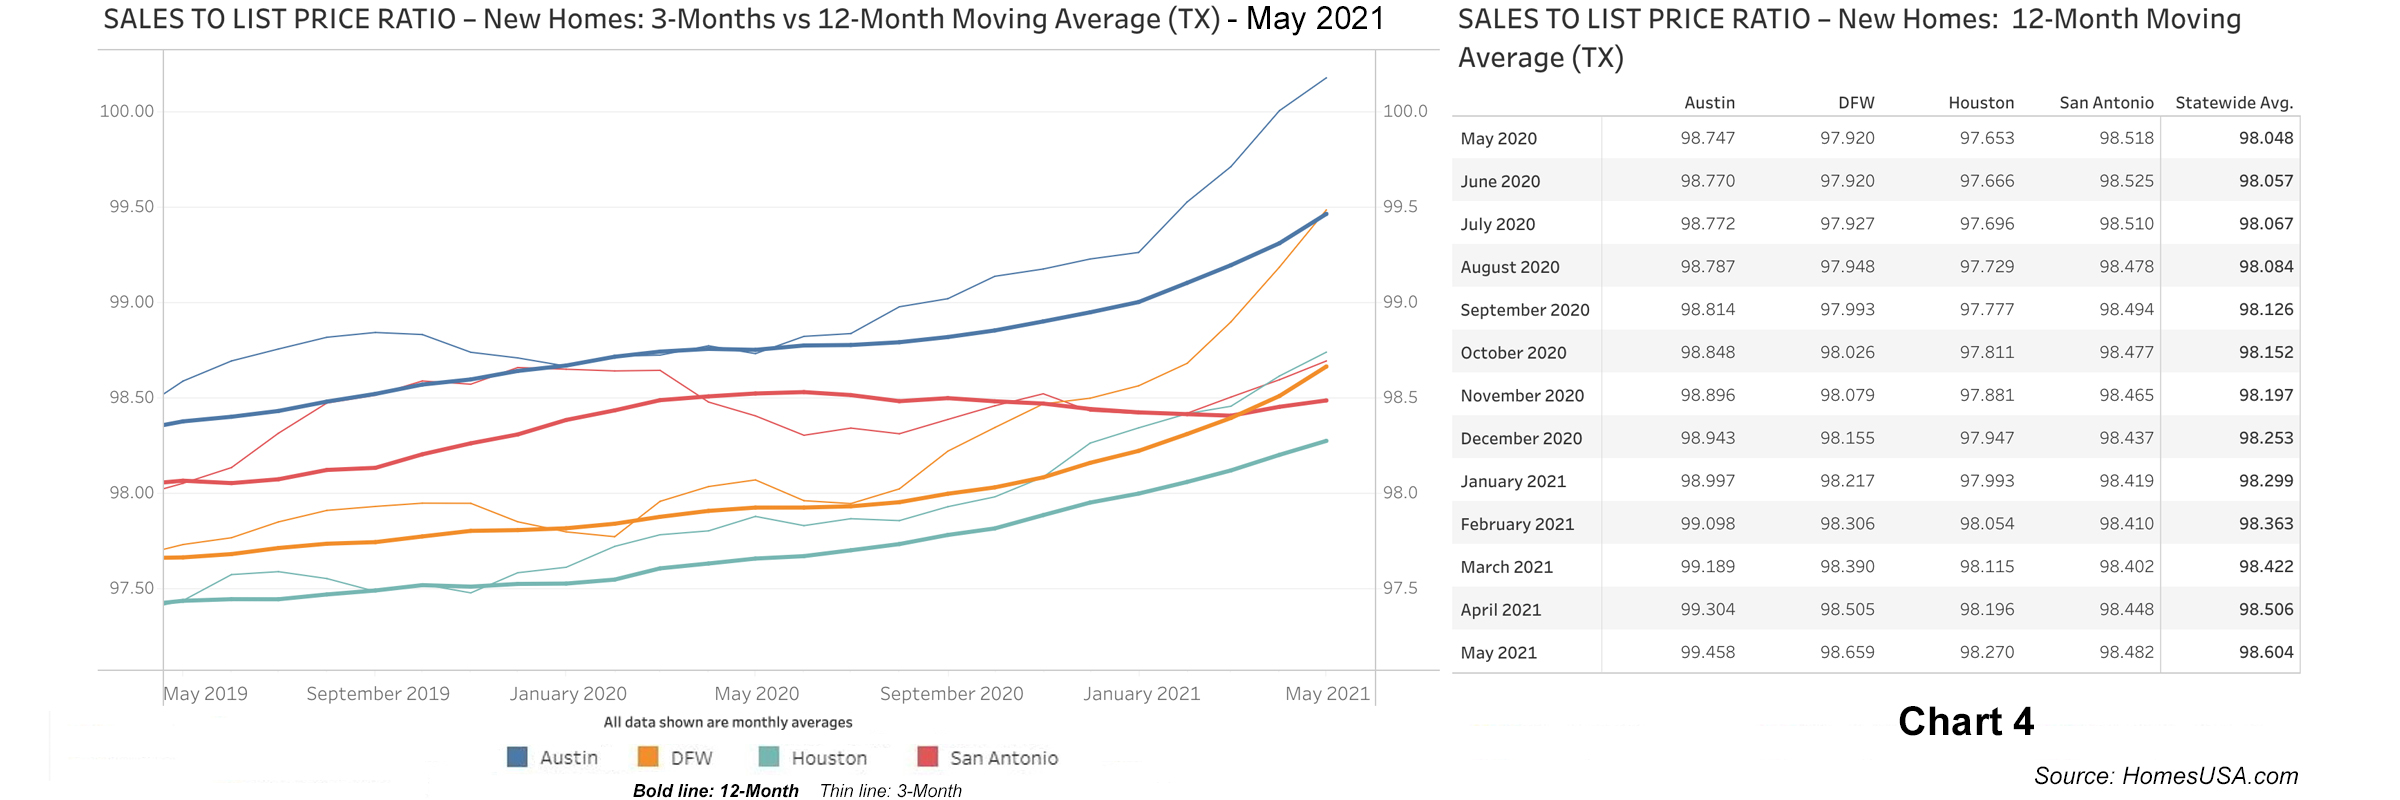 Chart 4: Sales-to-List-Price Ratio Data for Texas New Homes - May 2021